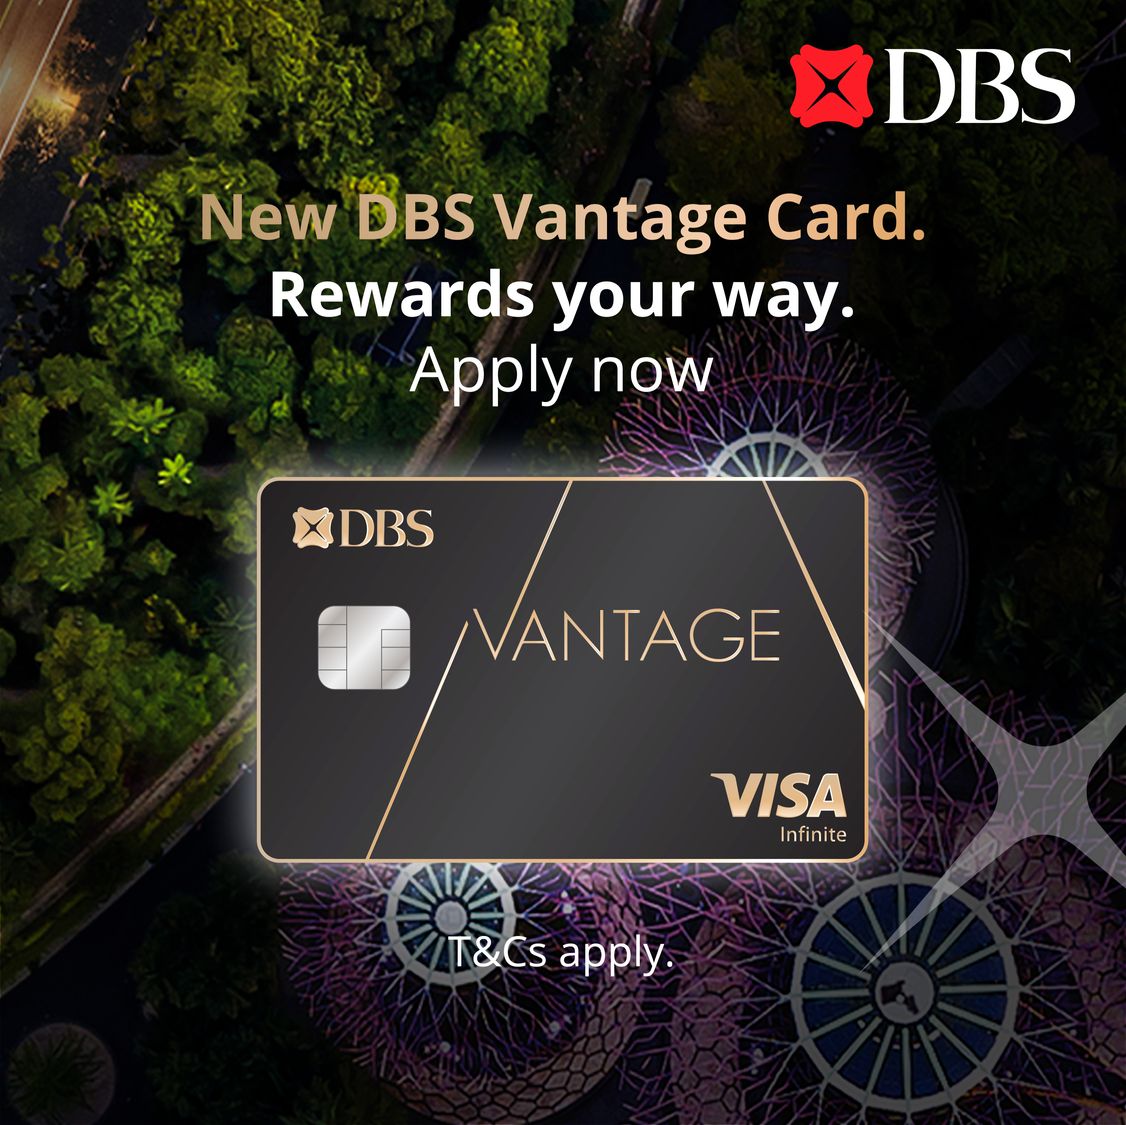 , This New Affluent Credit Card from DBS Offers the Best in Class